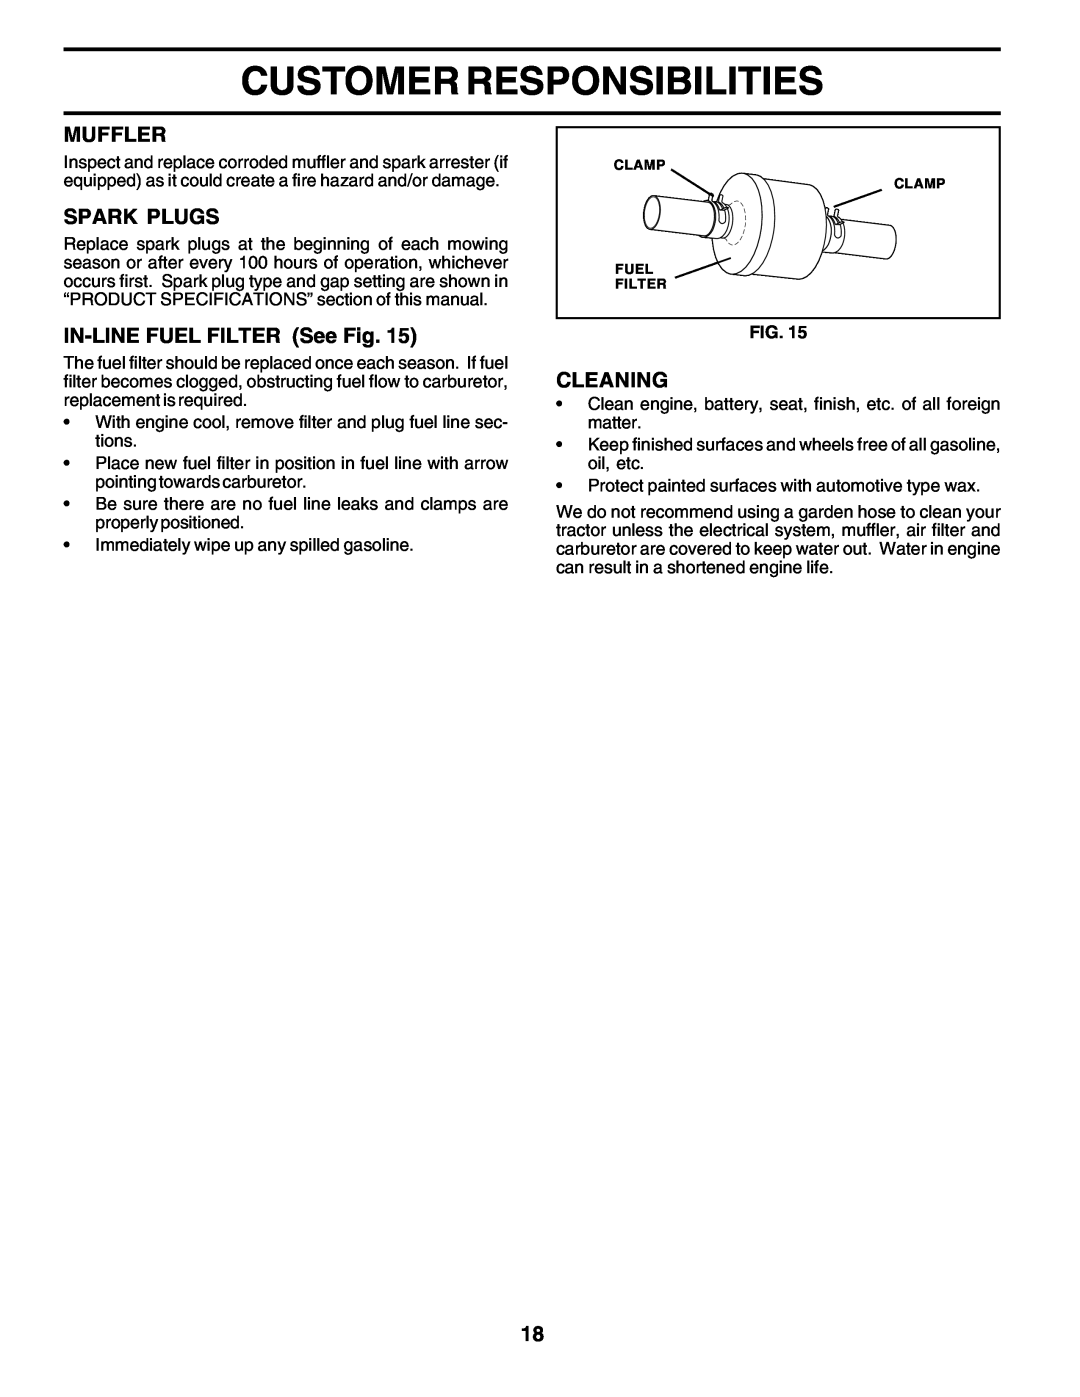 Poulan PO14542C manual Customer Responsibilities, Muffler, Spark Plugs, IN-LINE FUEL FILTER See Fig, Cleaning 